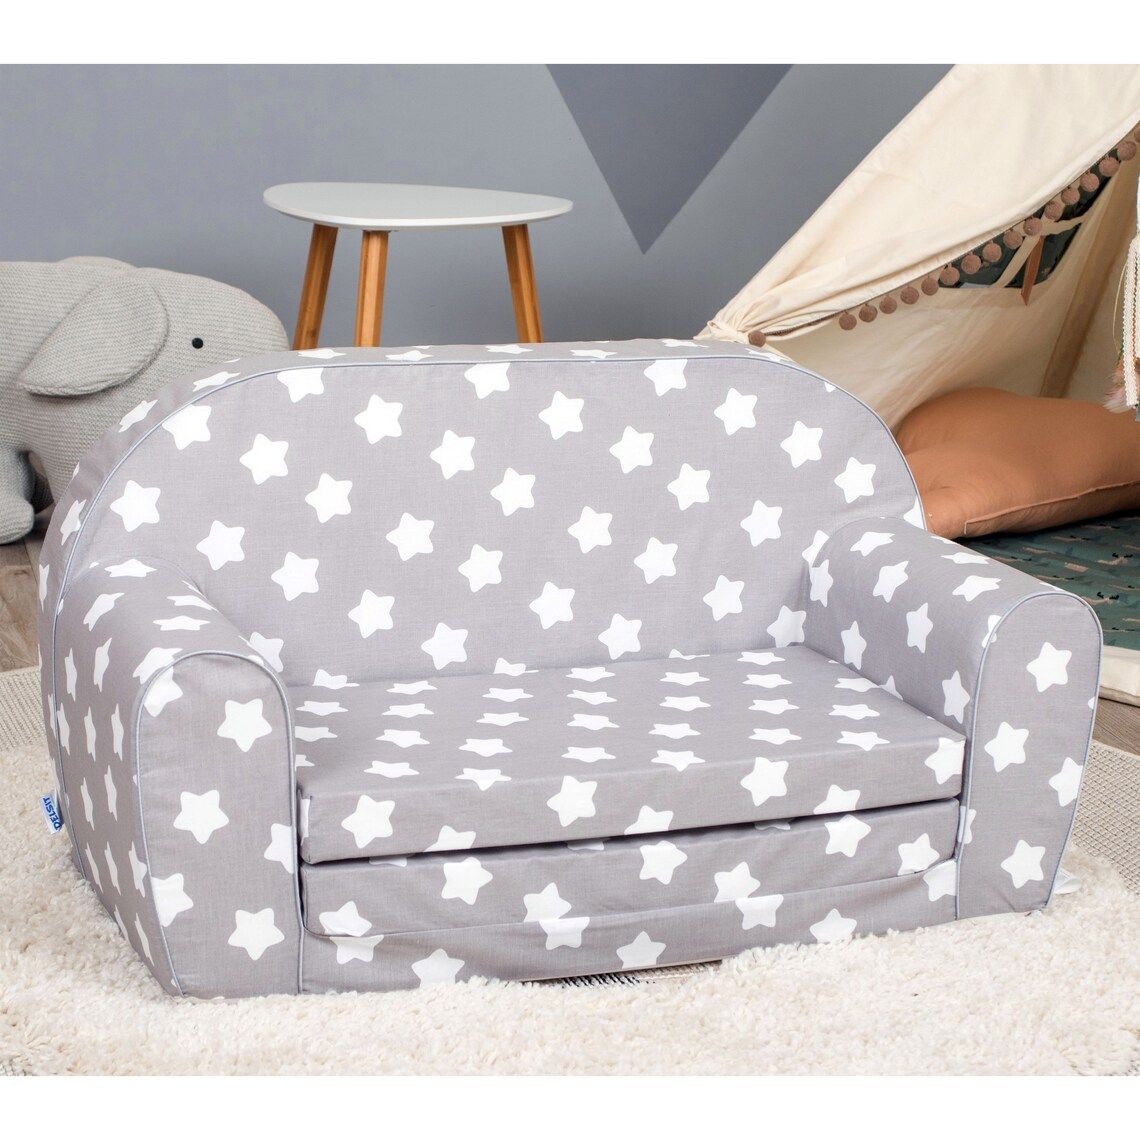 small gray couch with white stars all over